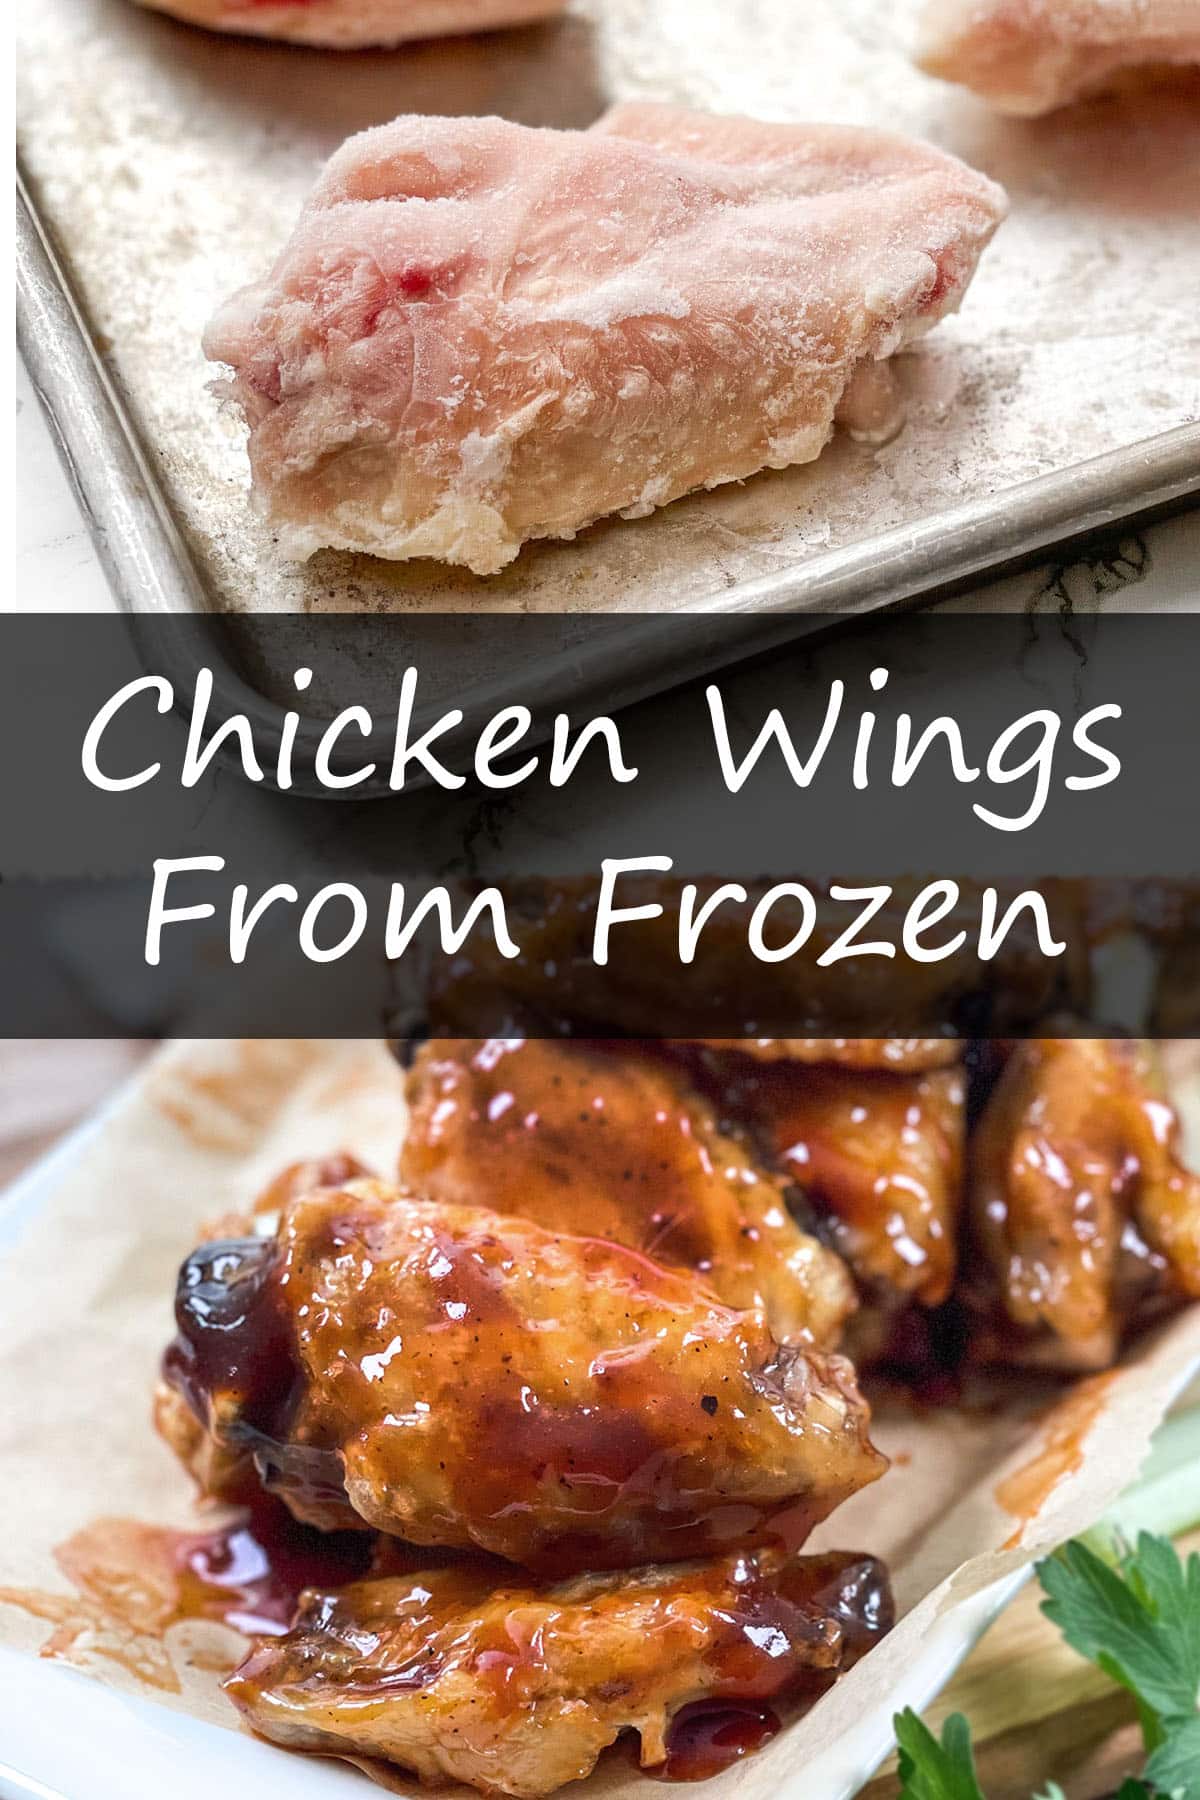 How To Cook Chicken Wings From Frozen